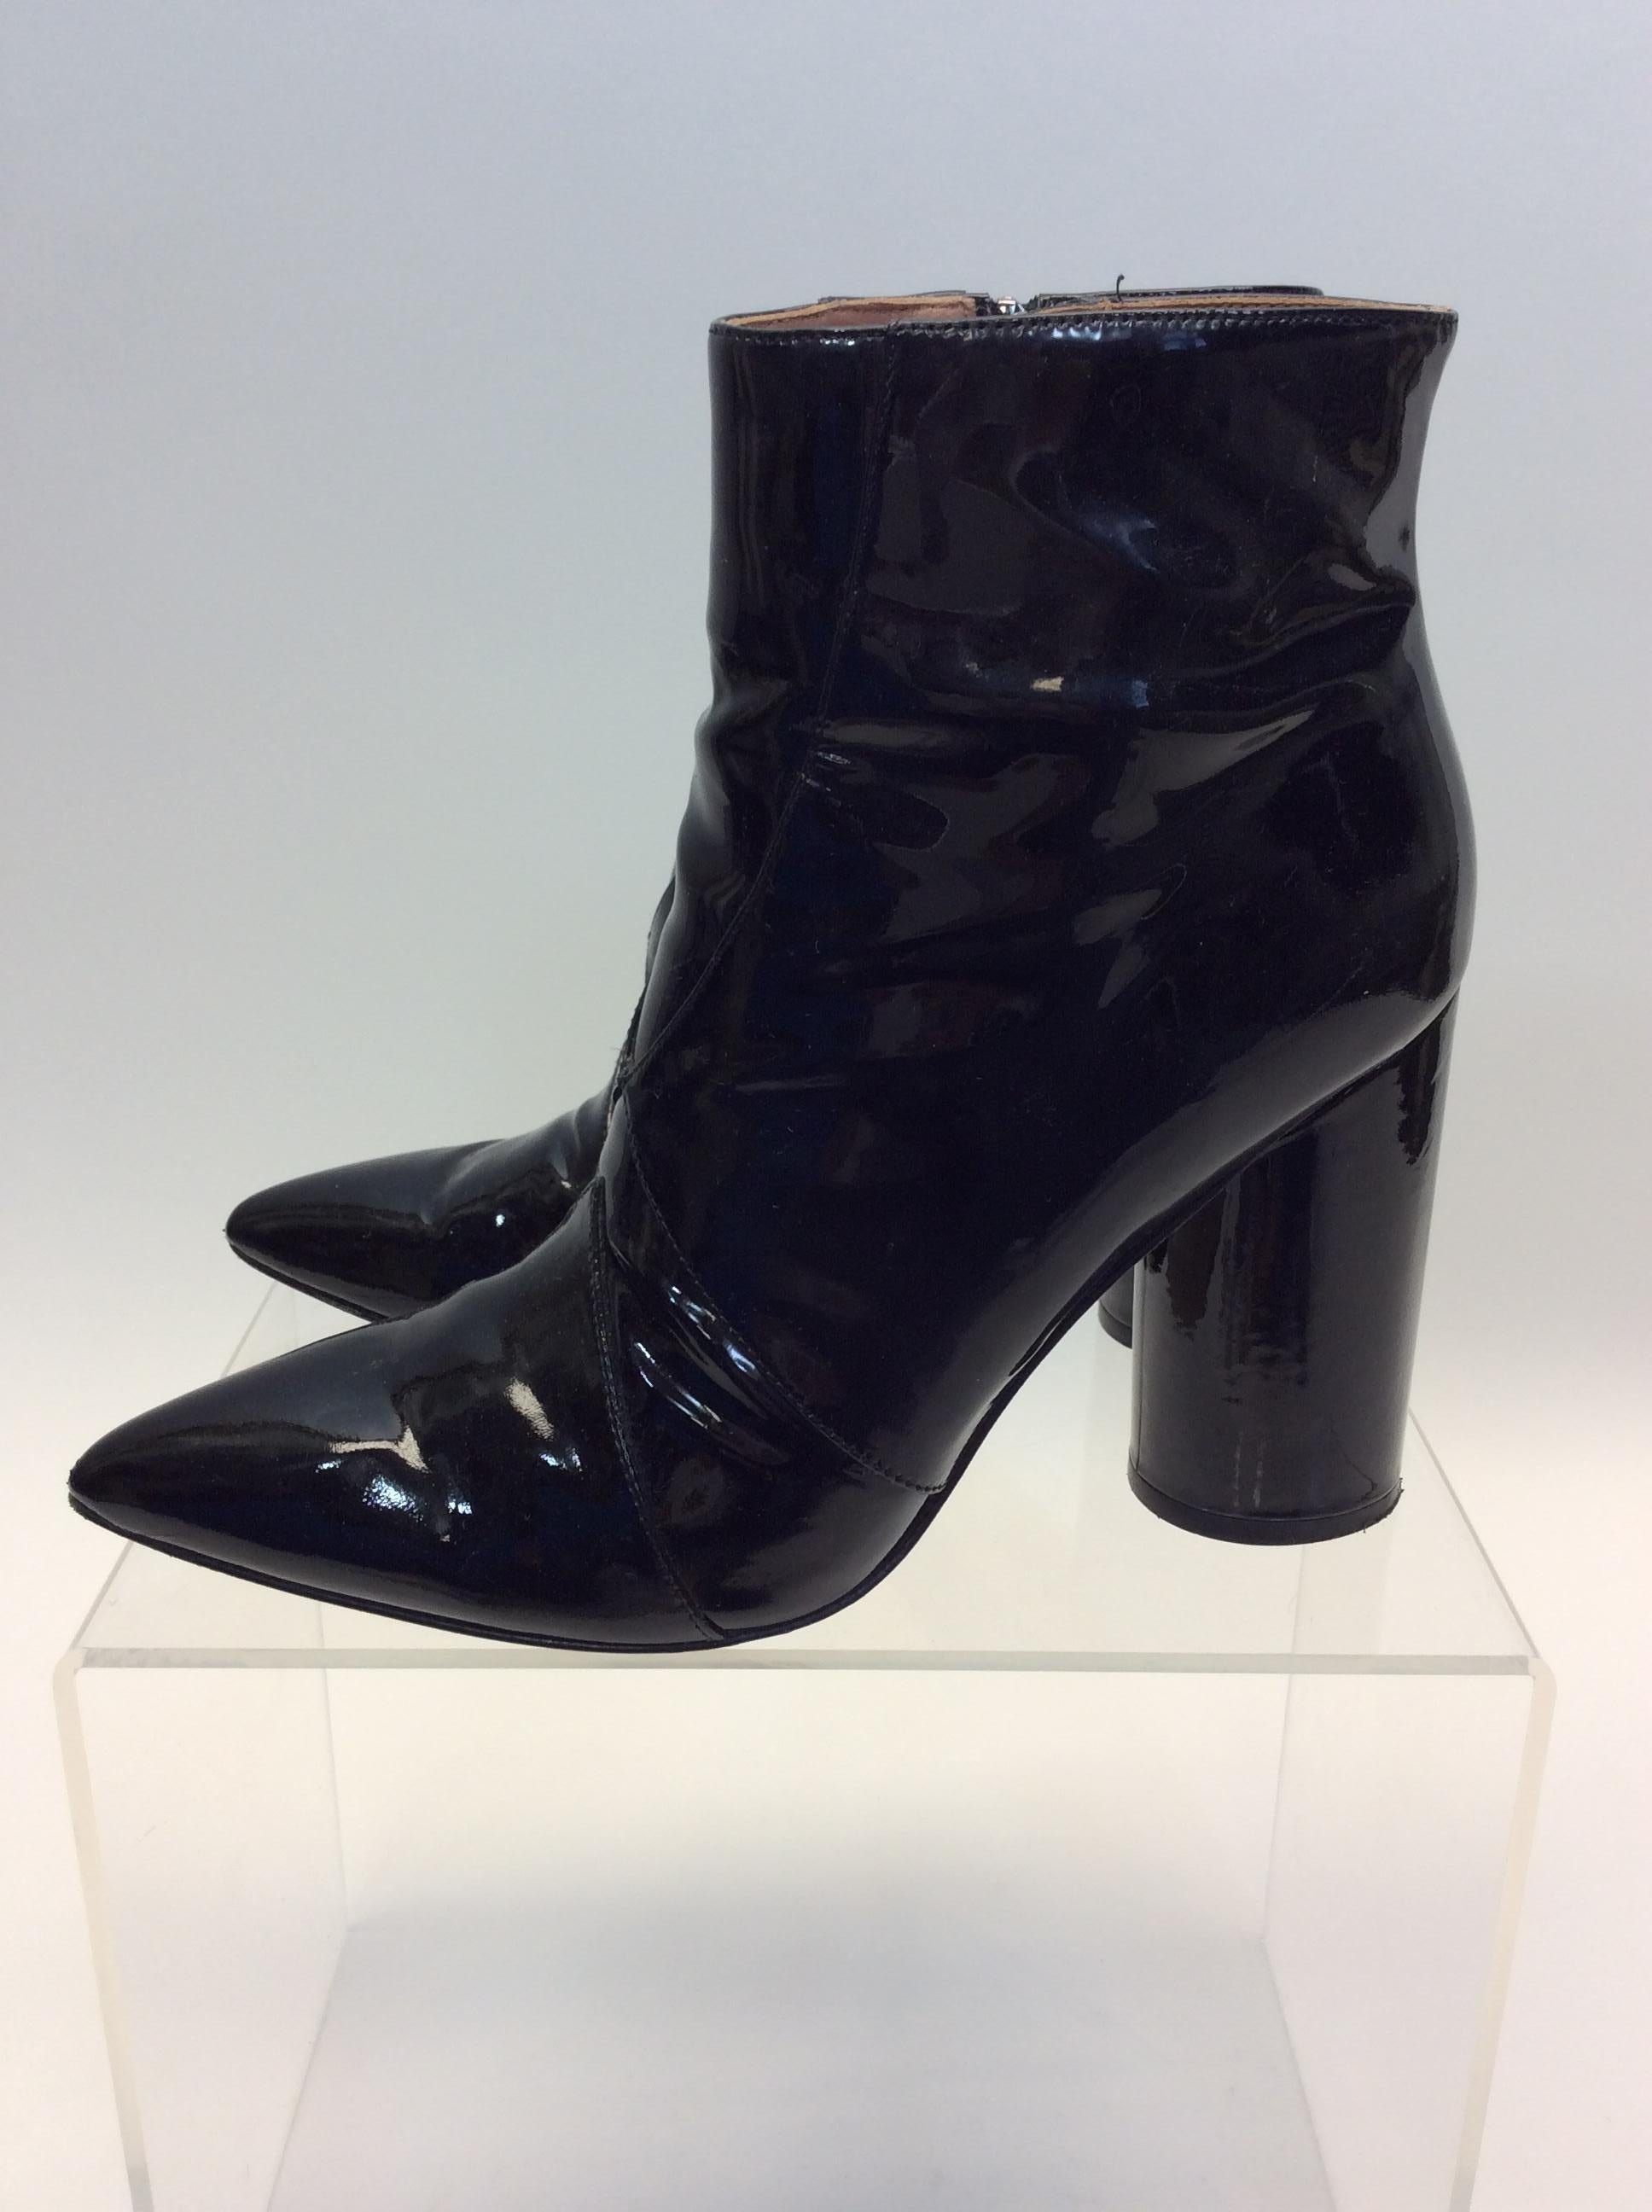 Sigerson Morrison Patent Leather Black Ankle Boot
$165
Made in Italy
Patent Leather
Size 9
4